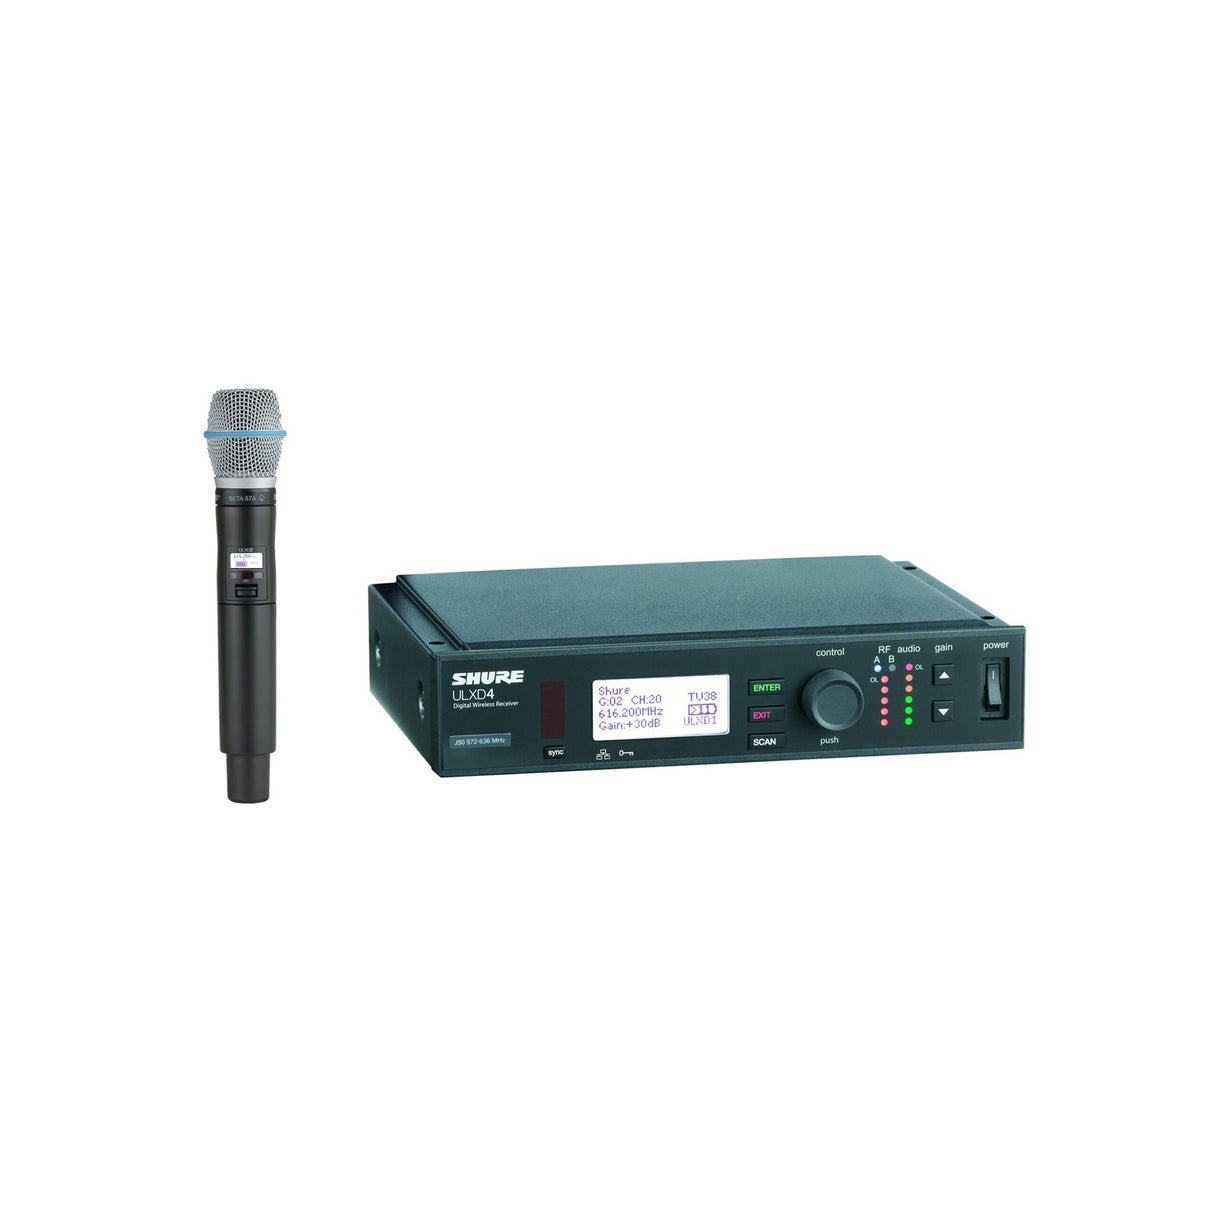 Shure ULXD24/B87A Handheld Wireless Microphone System, H50 534-598 MHz